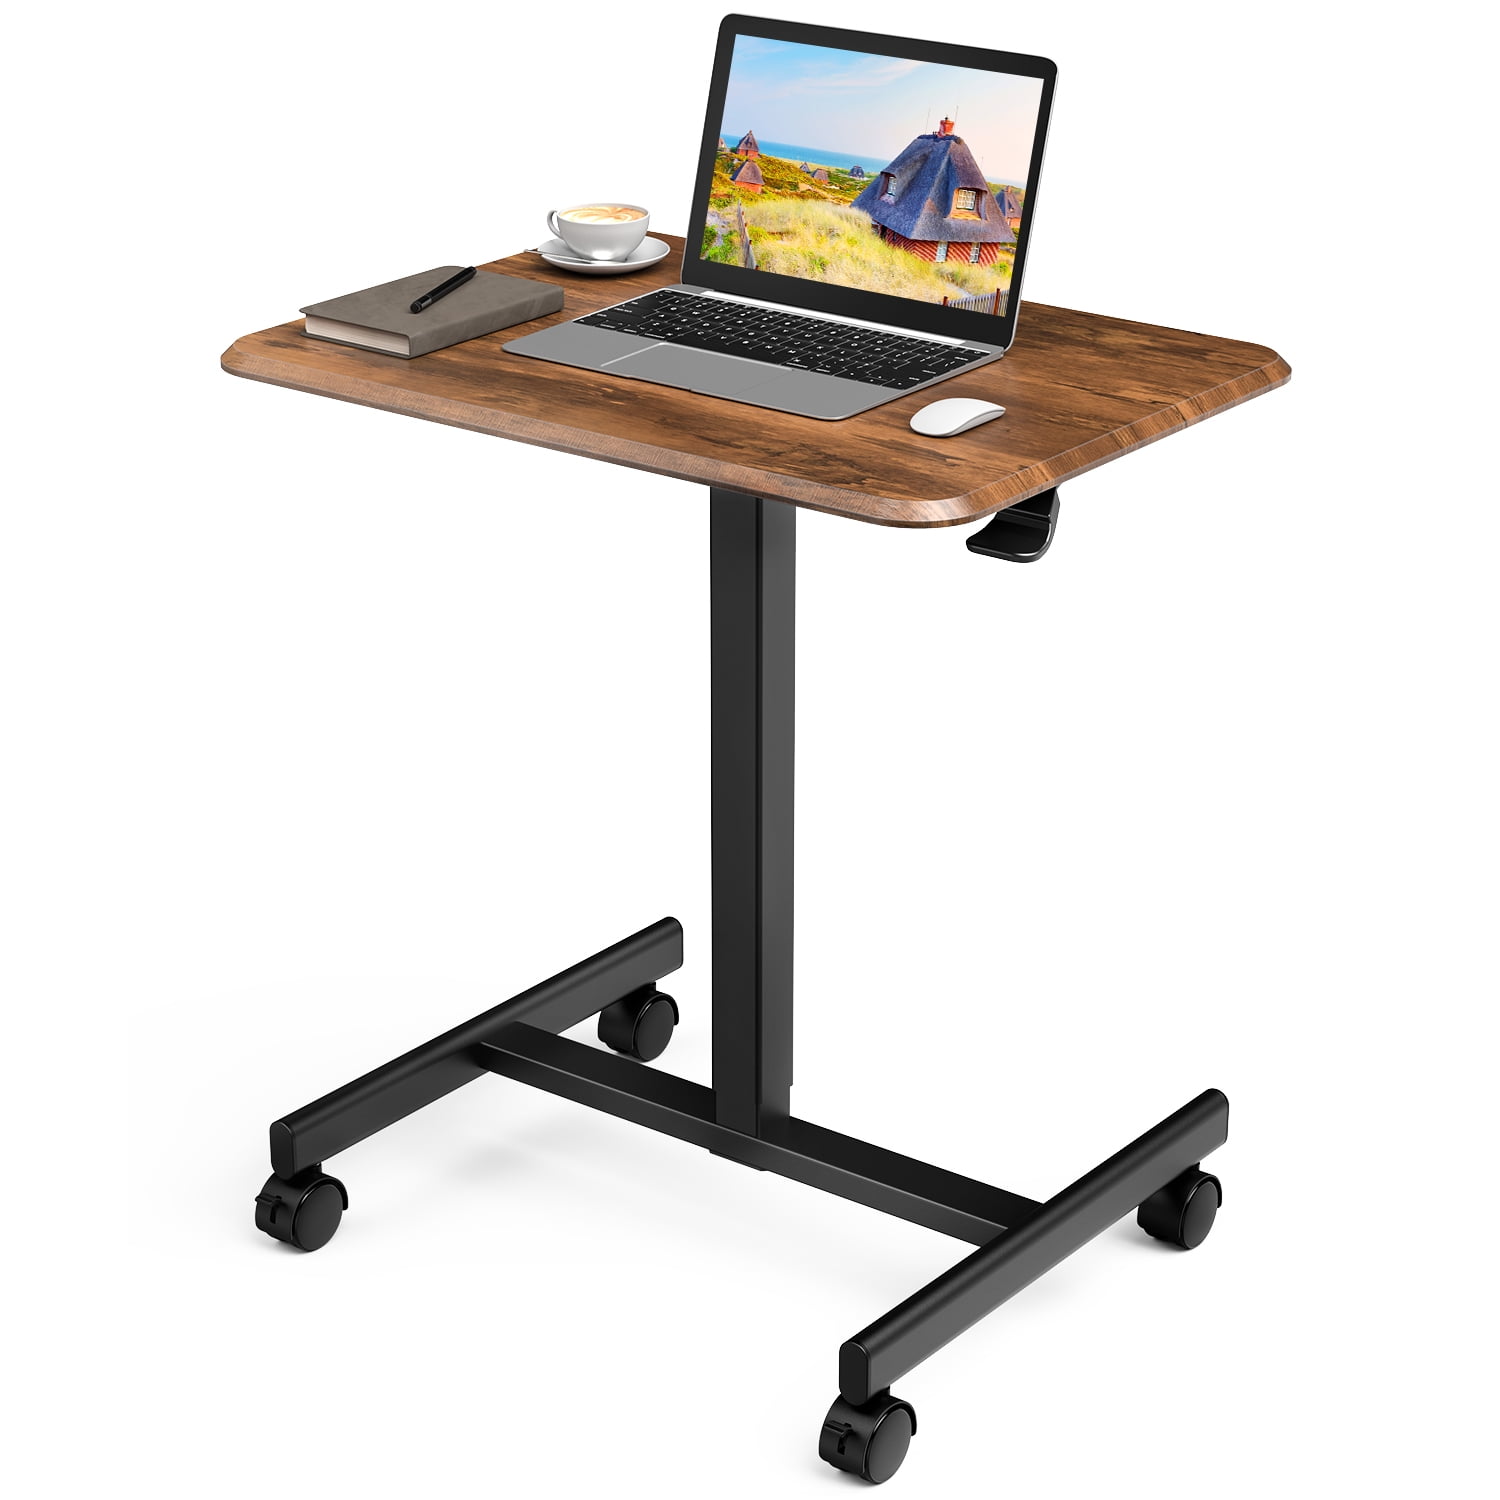 QZMDSM Rolling Desk Portable Laptop Computer Desk Small Standing Desk for  Small Spaces Table for Couch Desk for Home Office Table Mobile Adjustable